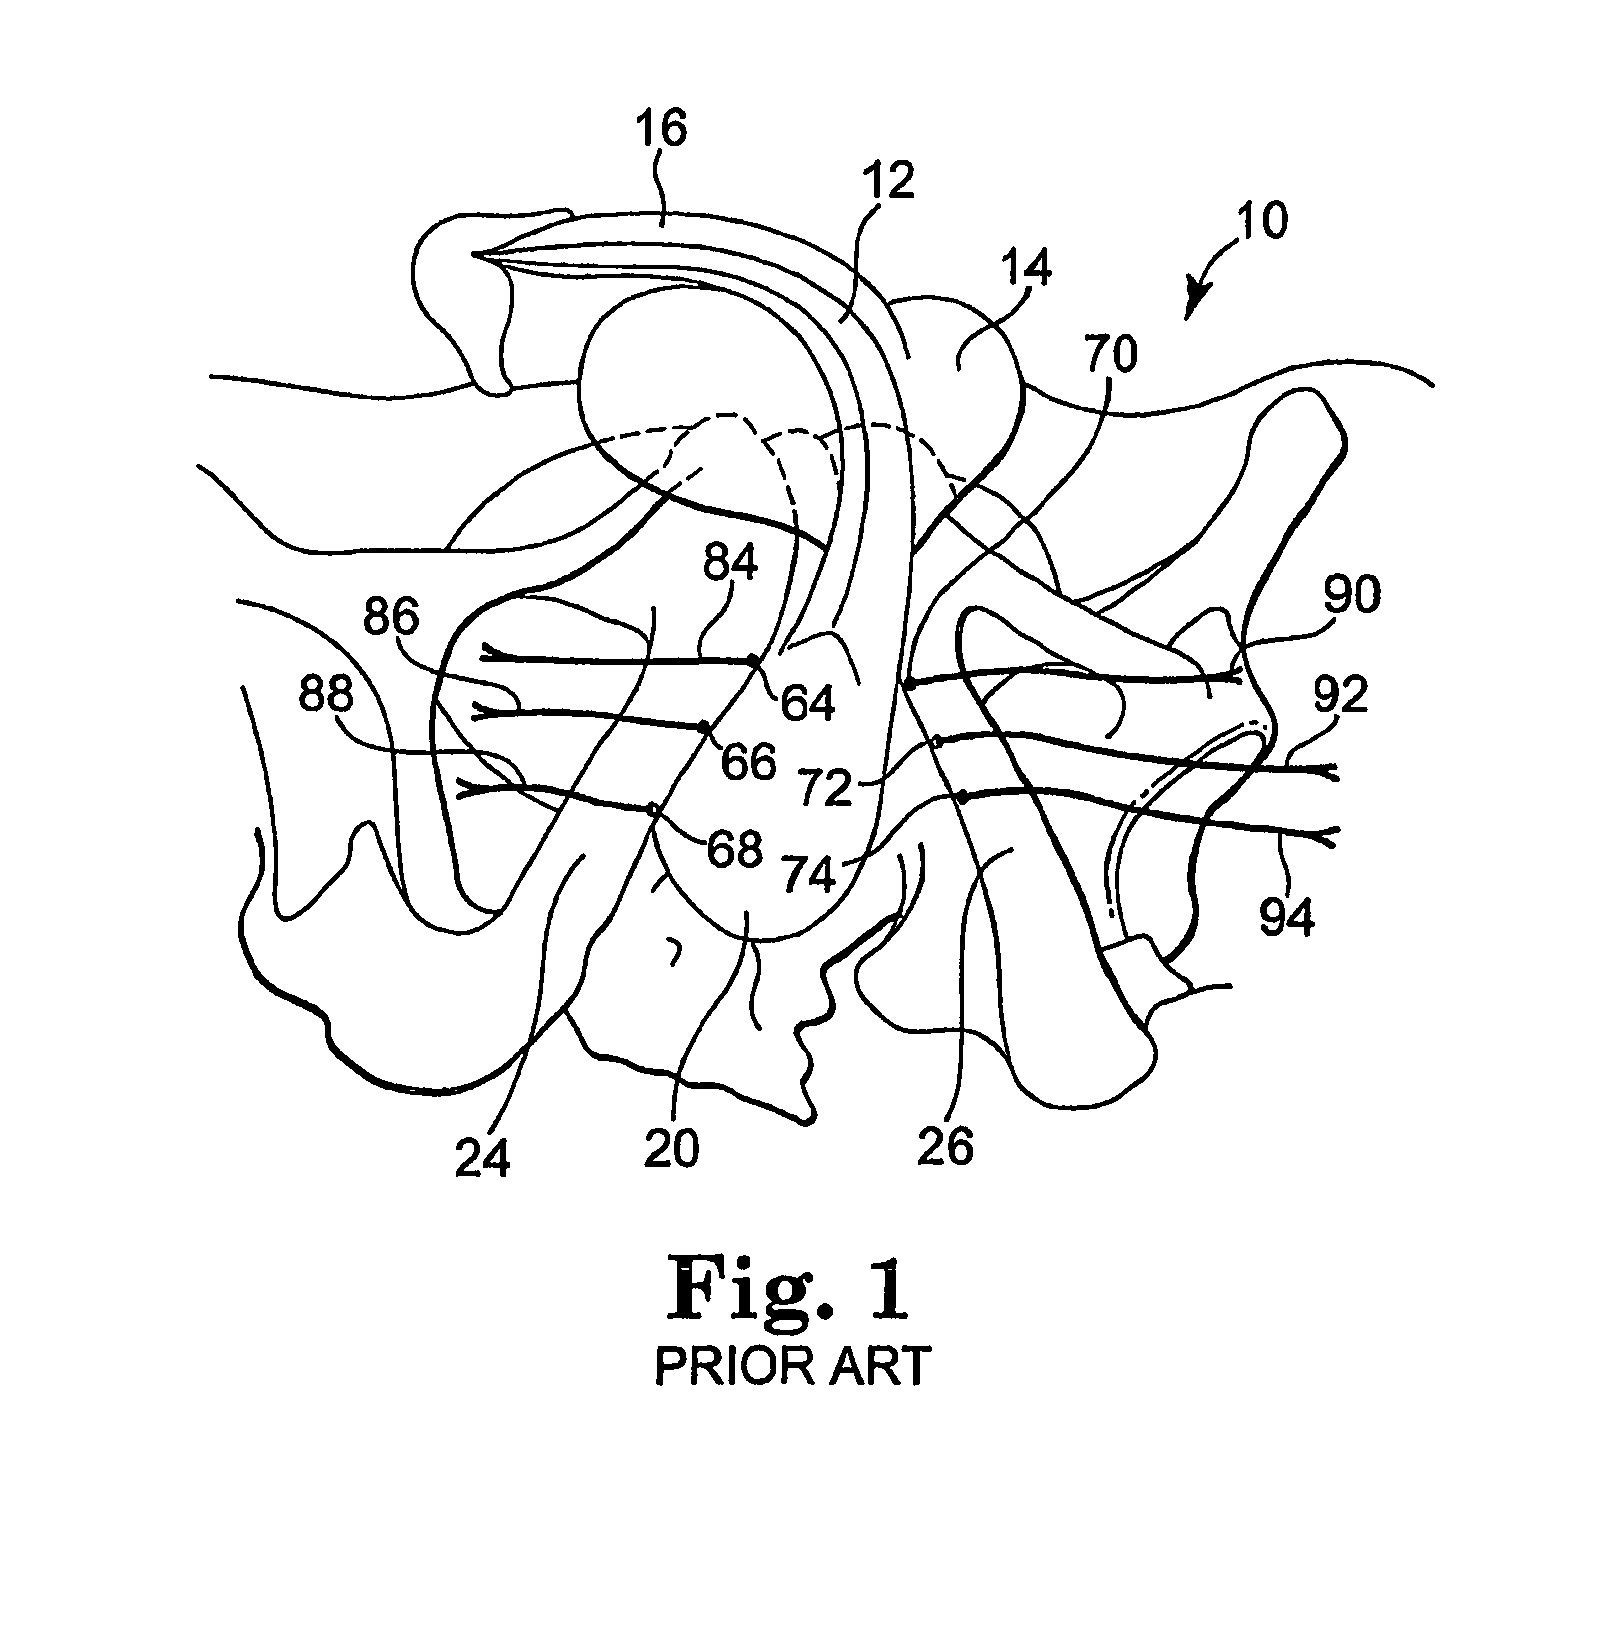 Methods and apparatus for securing a urethral sling to a pubic bone